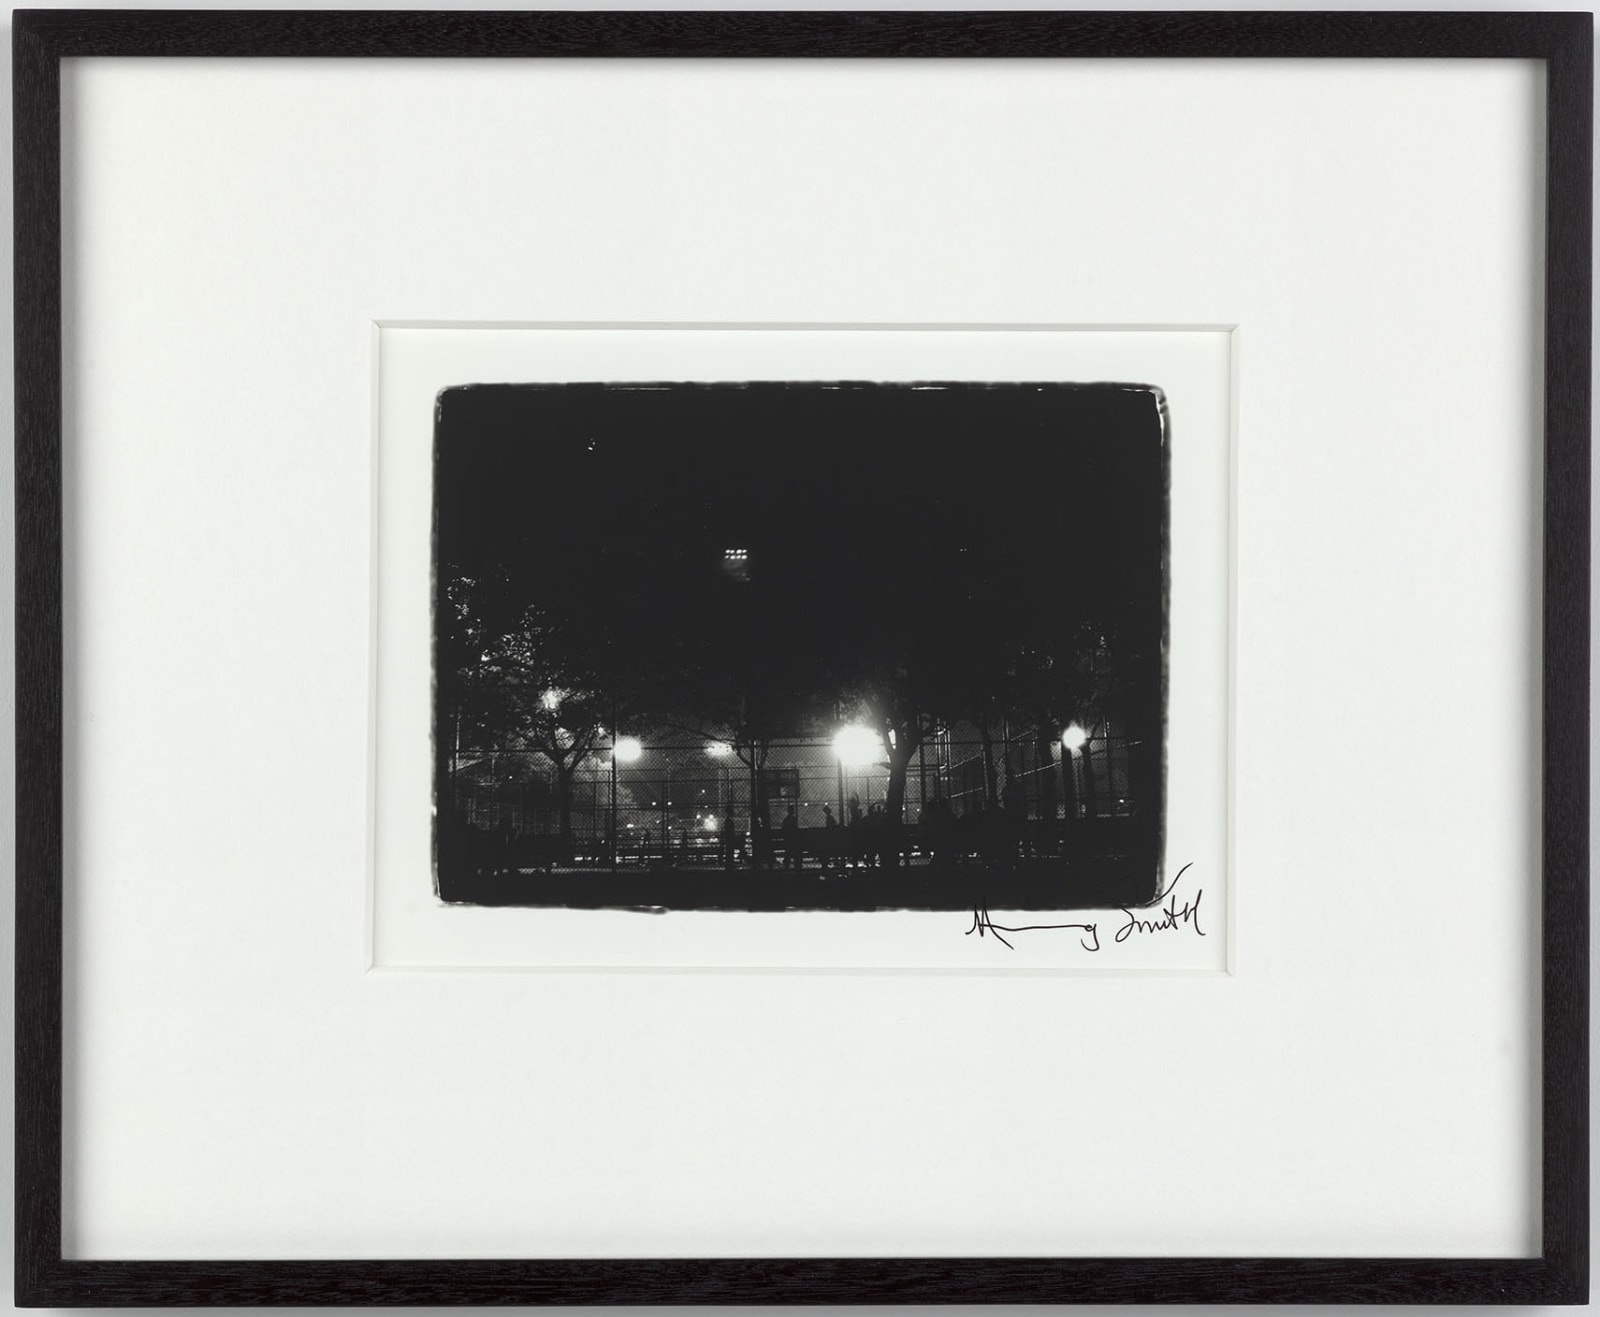 Ming Smith, Basketball Court (Invisible Man series), 1988-91